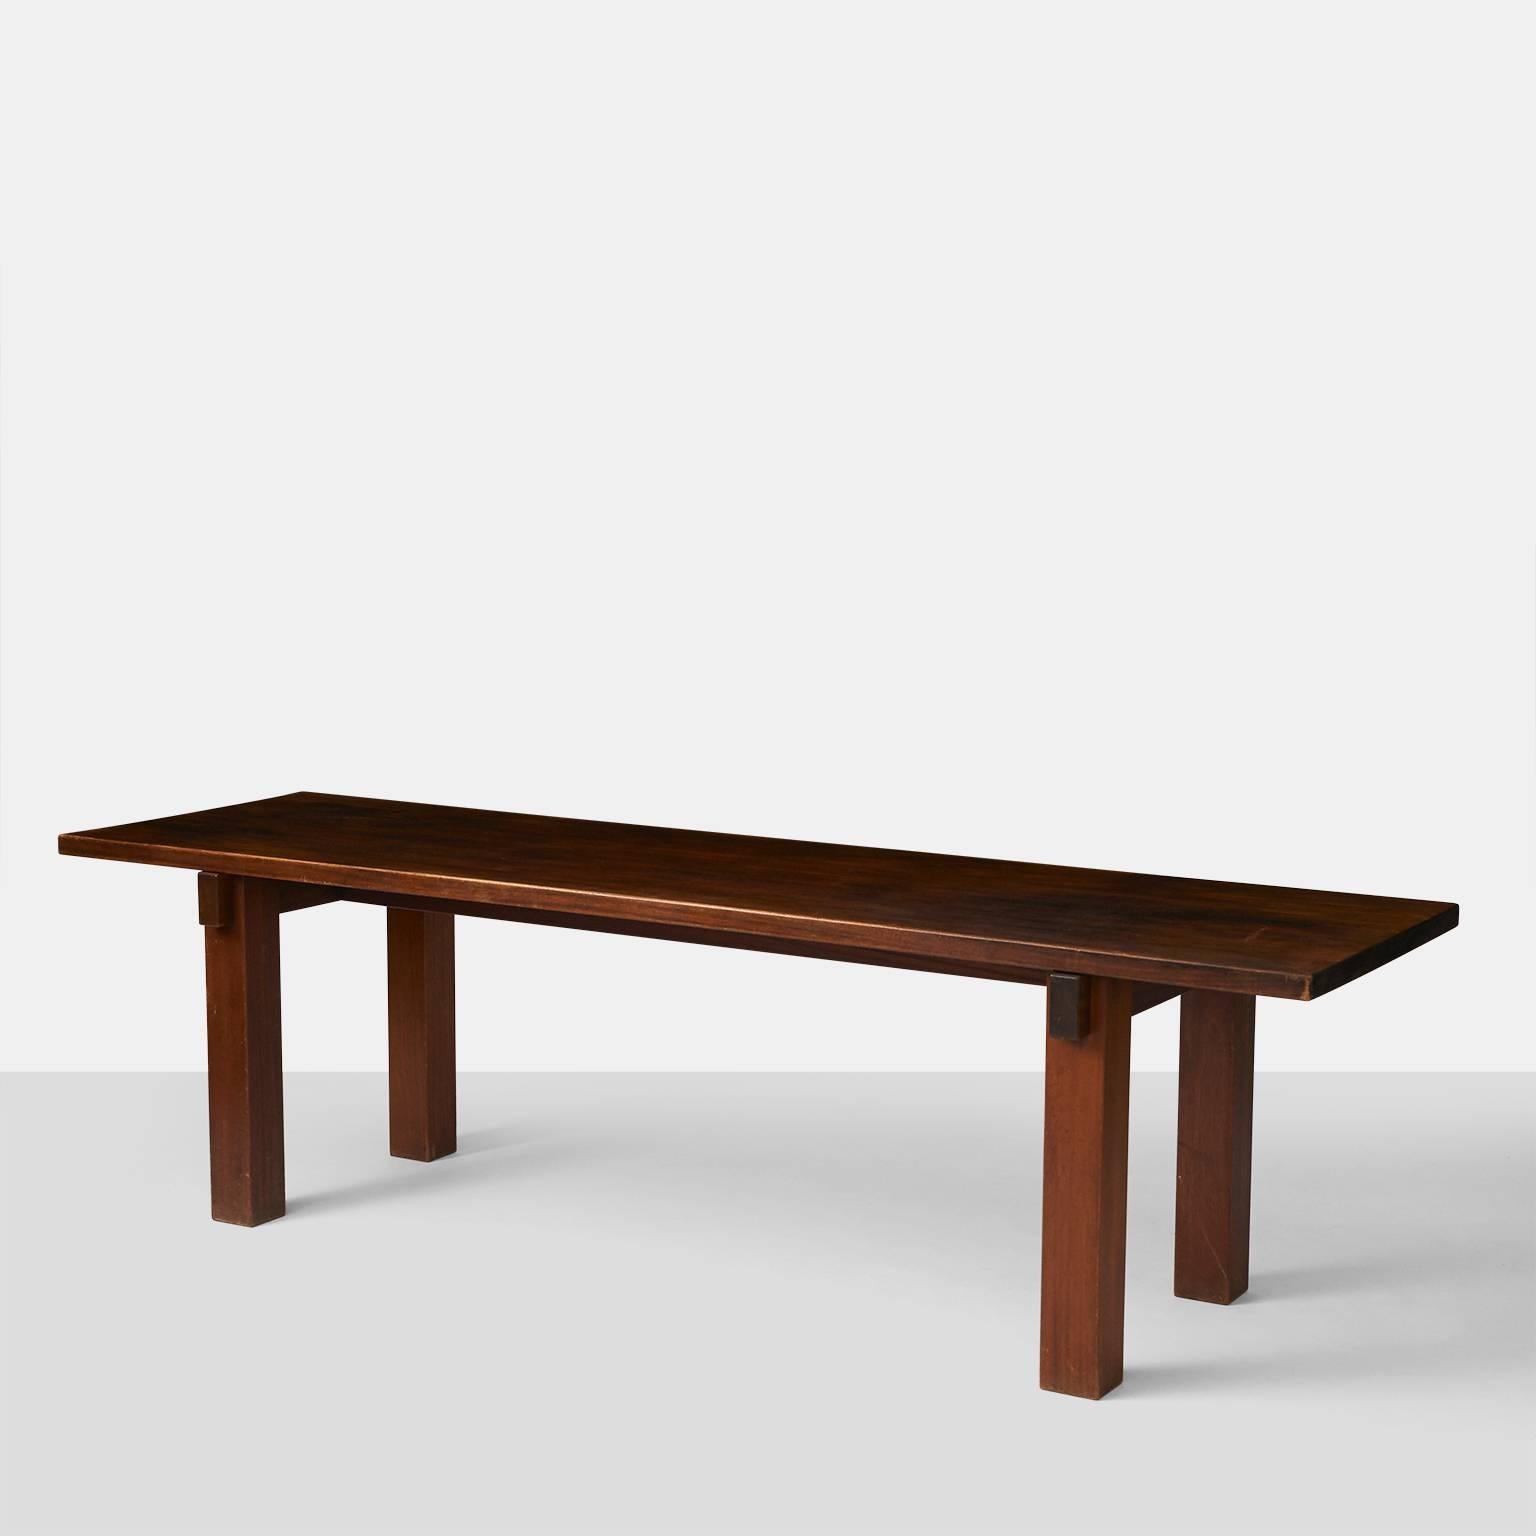 A very rare table in sapele mahogany by Charlotte Perriand which she used personally in her Rio de Janeiro apartment as a console table.